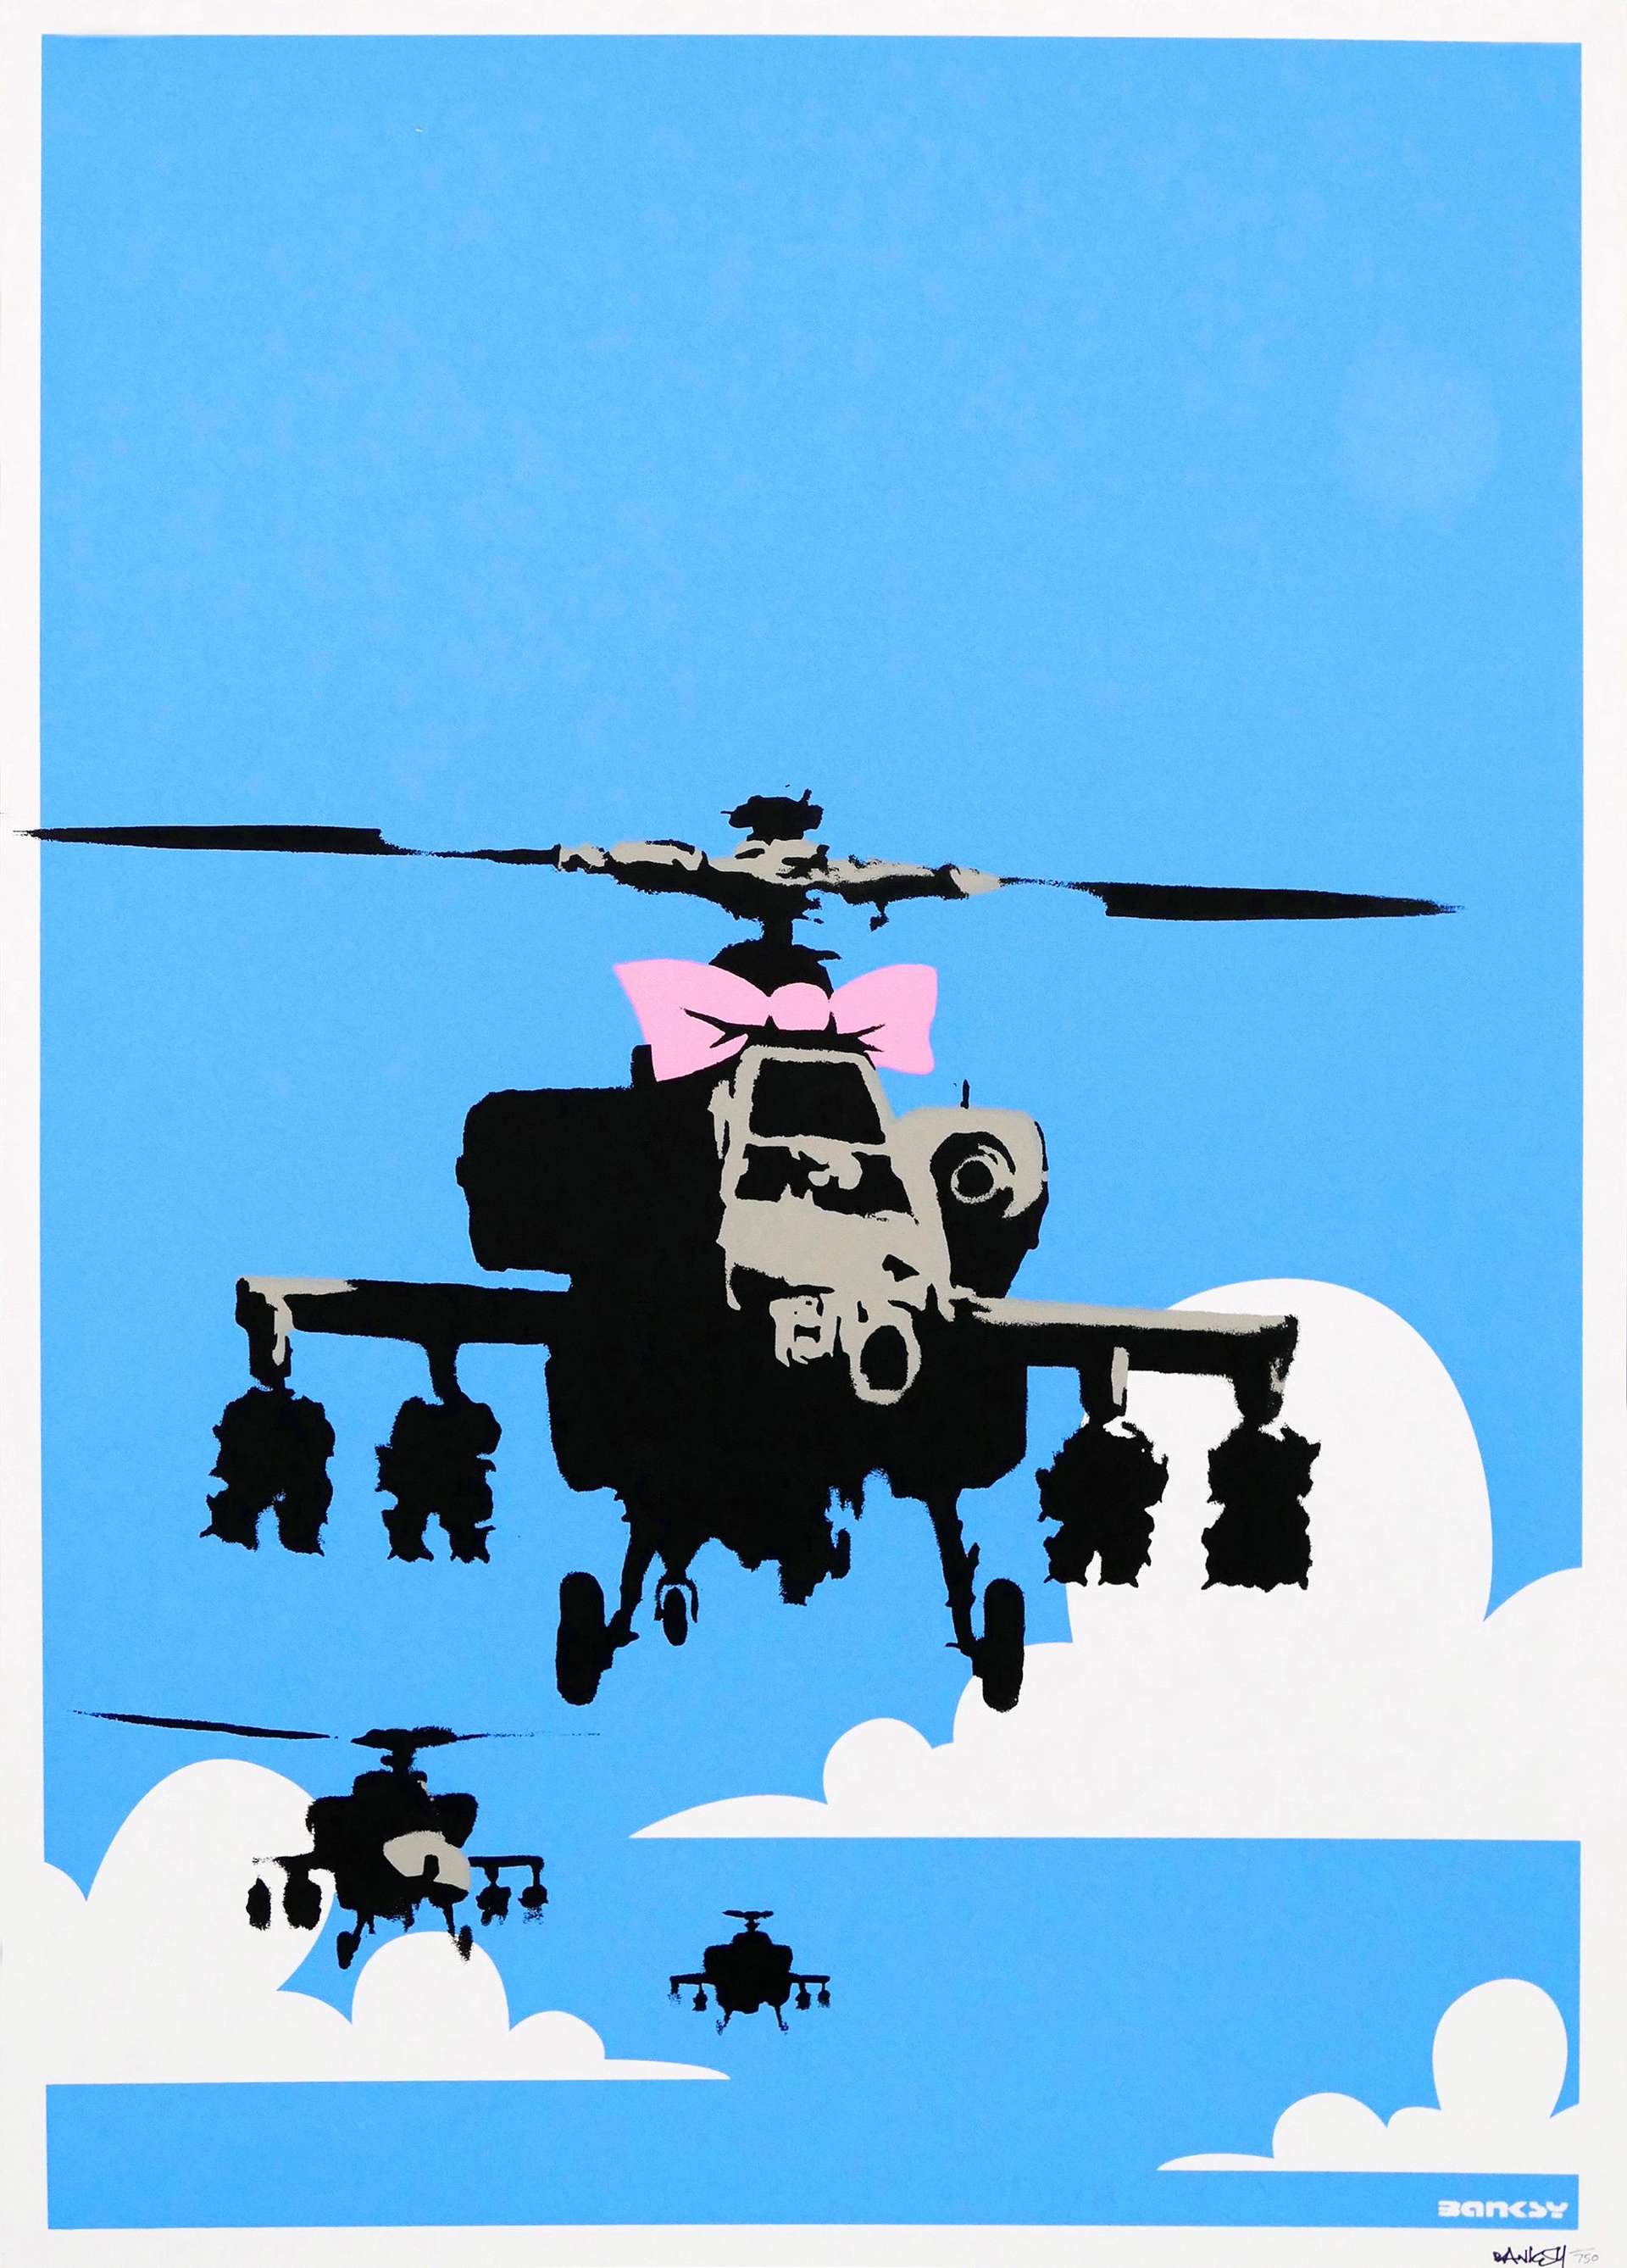 A print showing military-grade helicopters adorned with pink bows against a blue sky.